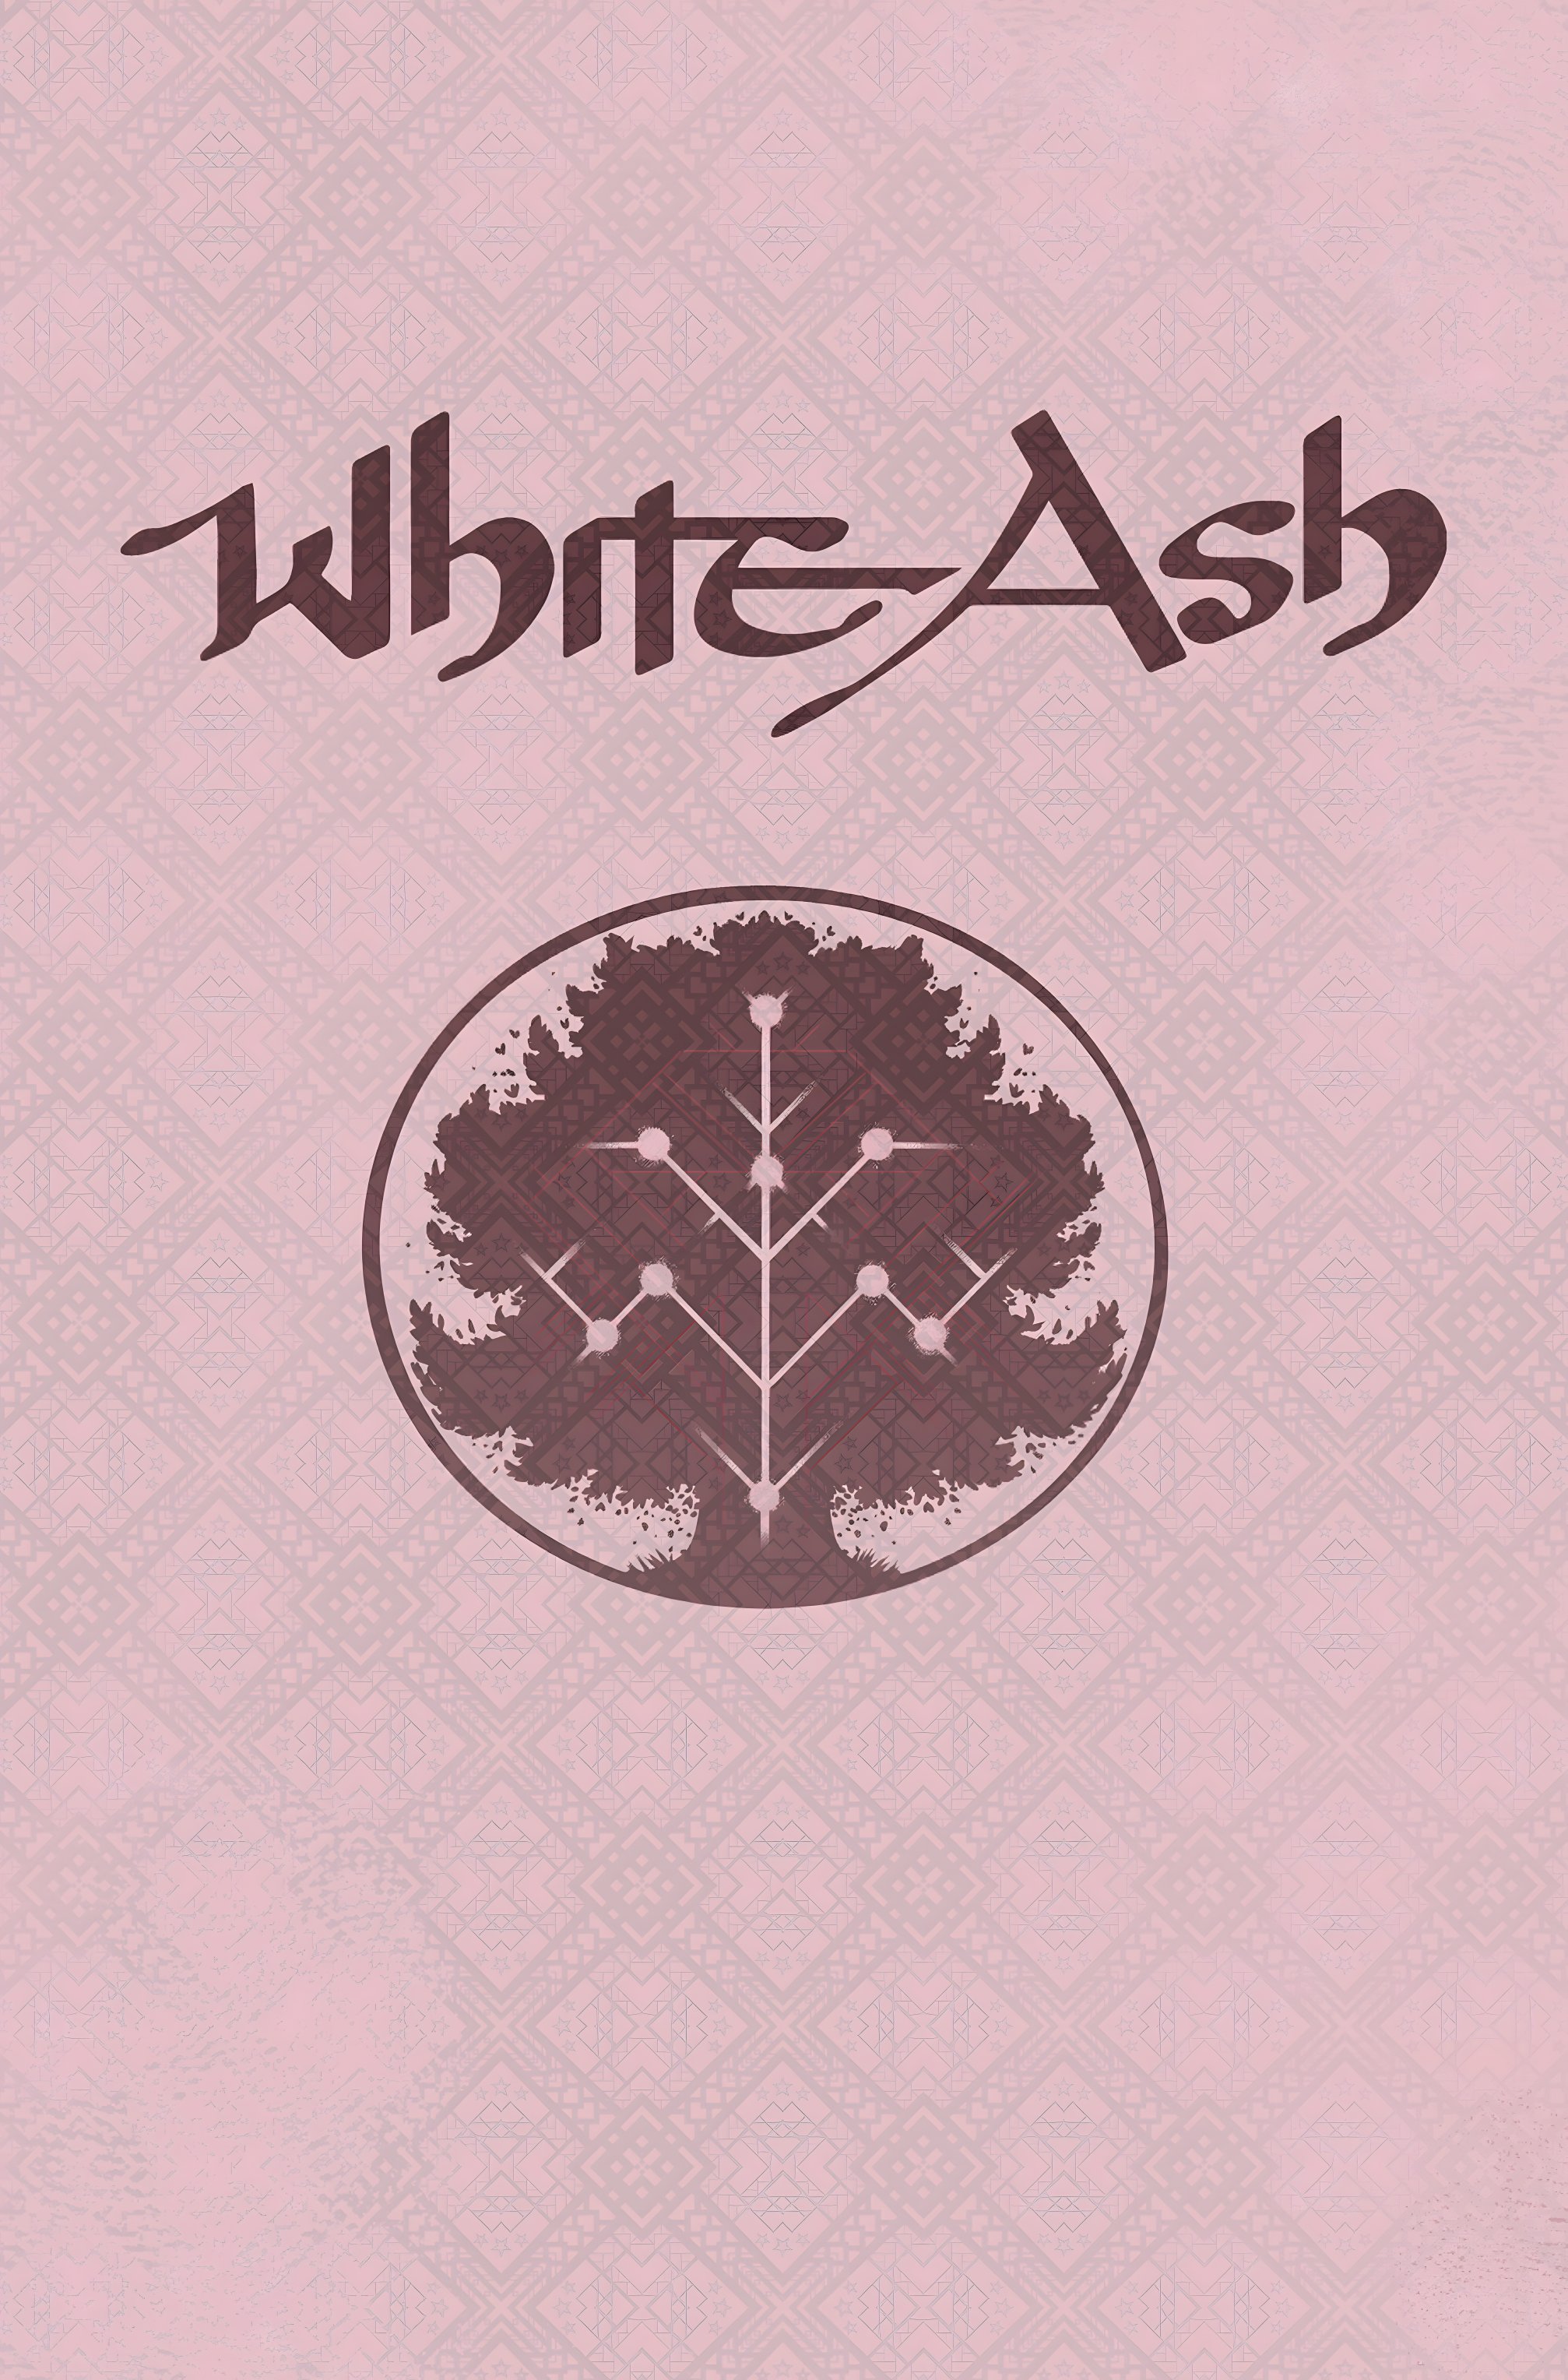 Read online White Ash comic -  Issue # TPB (Part 1) - 3